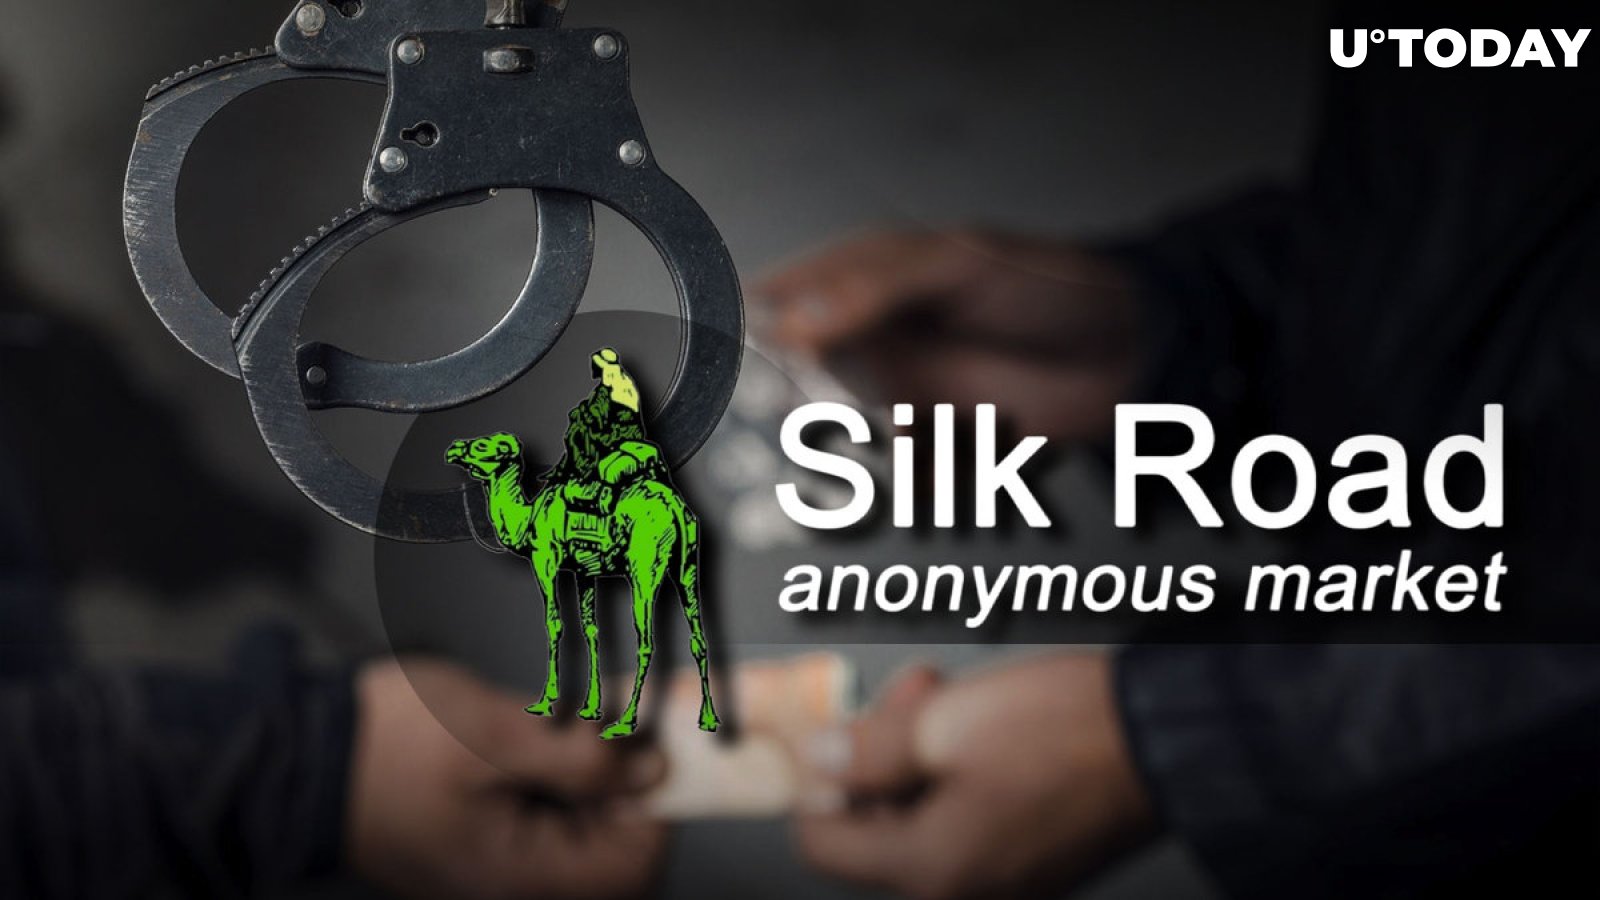 Silk Road founder Ross Ulbricht turns 40 and has been behind bars for 11 years